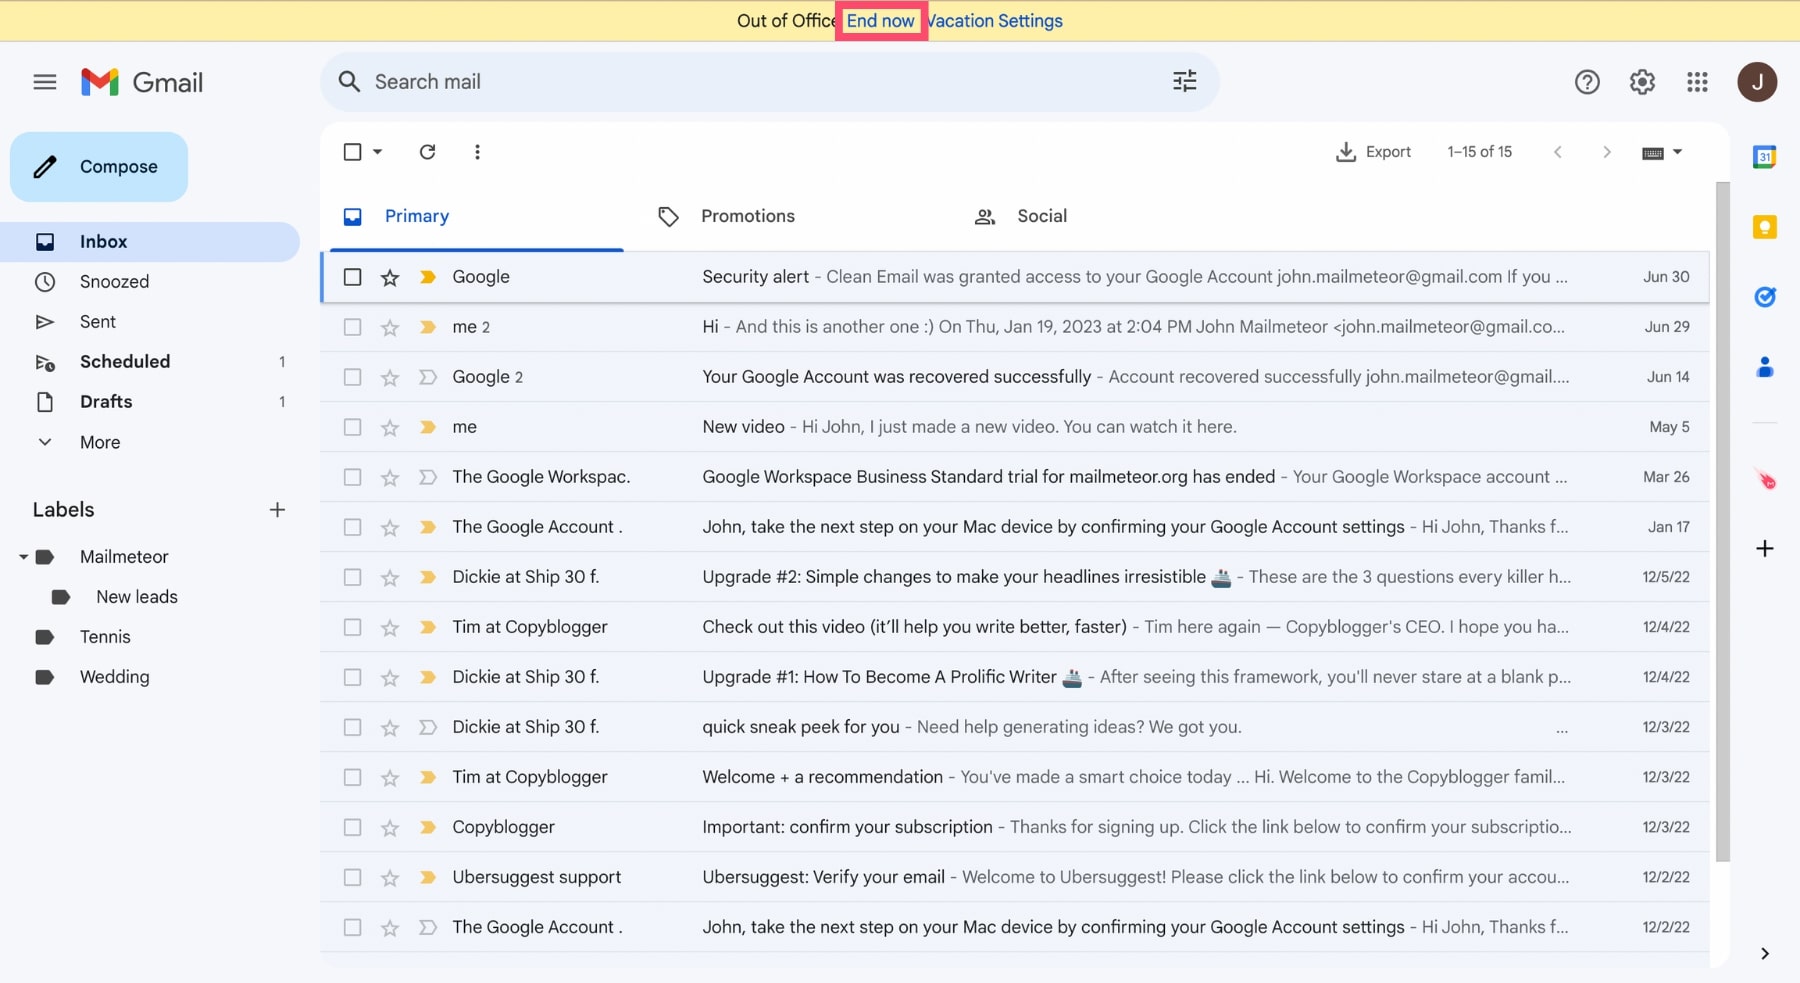 Cancel your vacation responder in Gmail